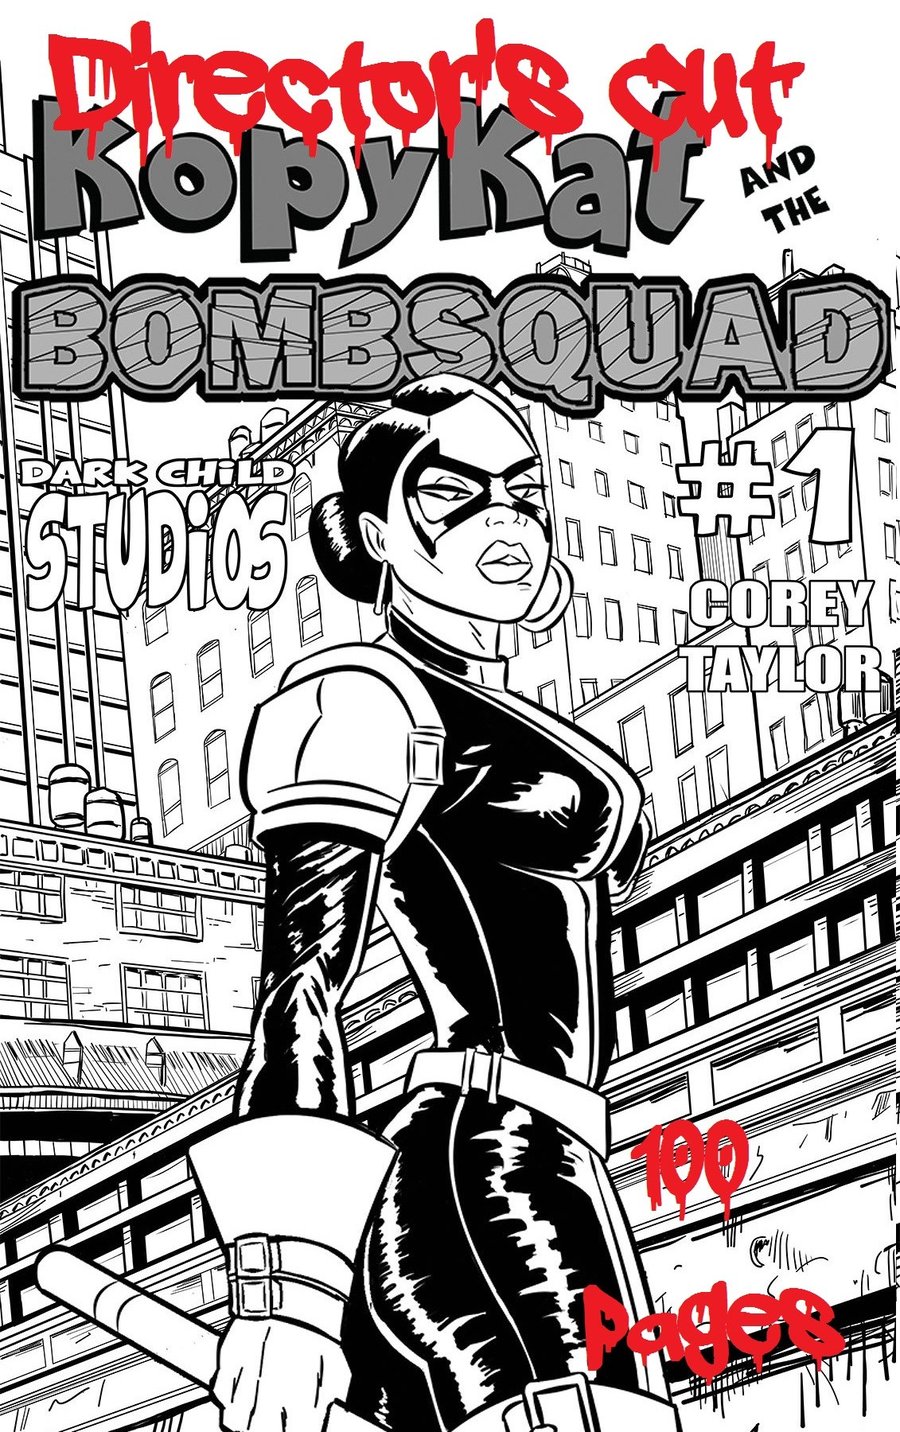 Image of Kopy Kat and The bomb squad #1 Director's Cut (64 Pages black and white) Signed by Artist